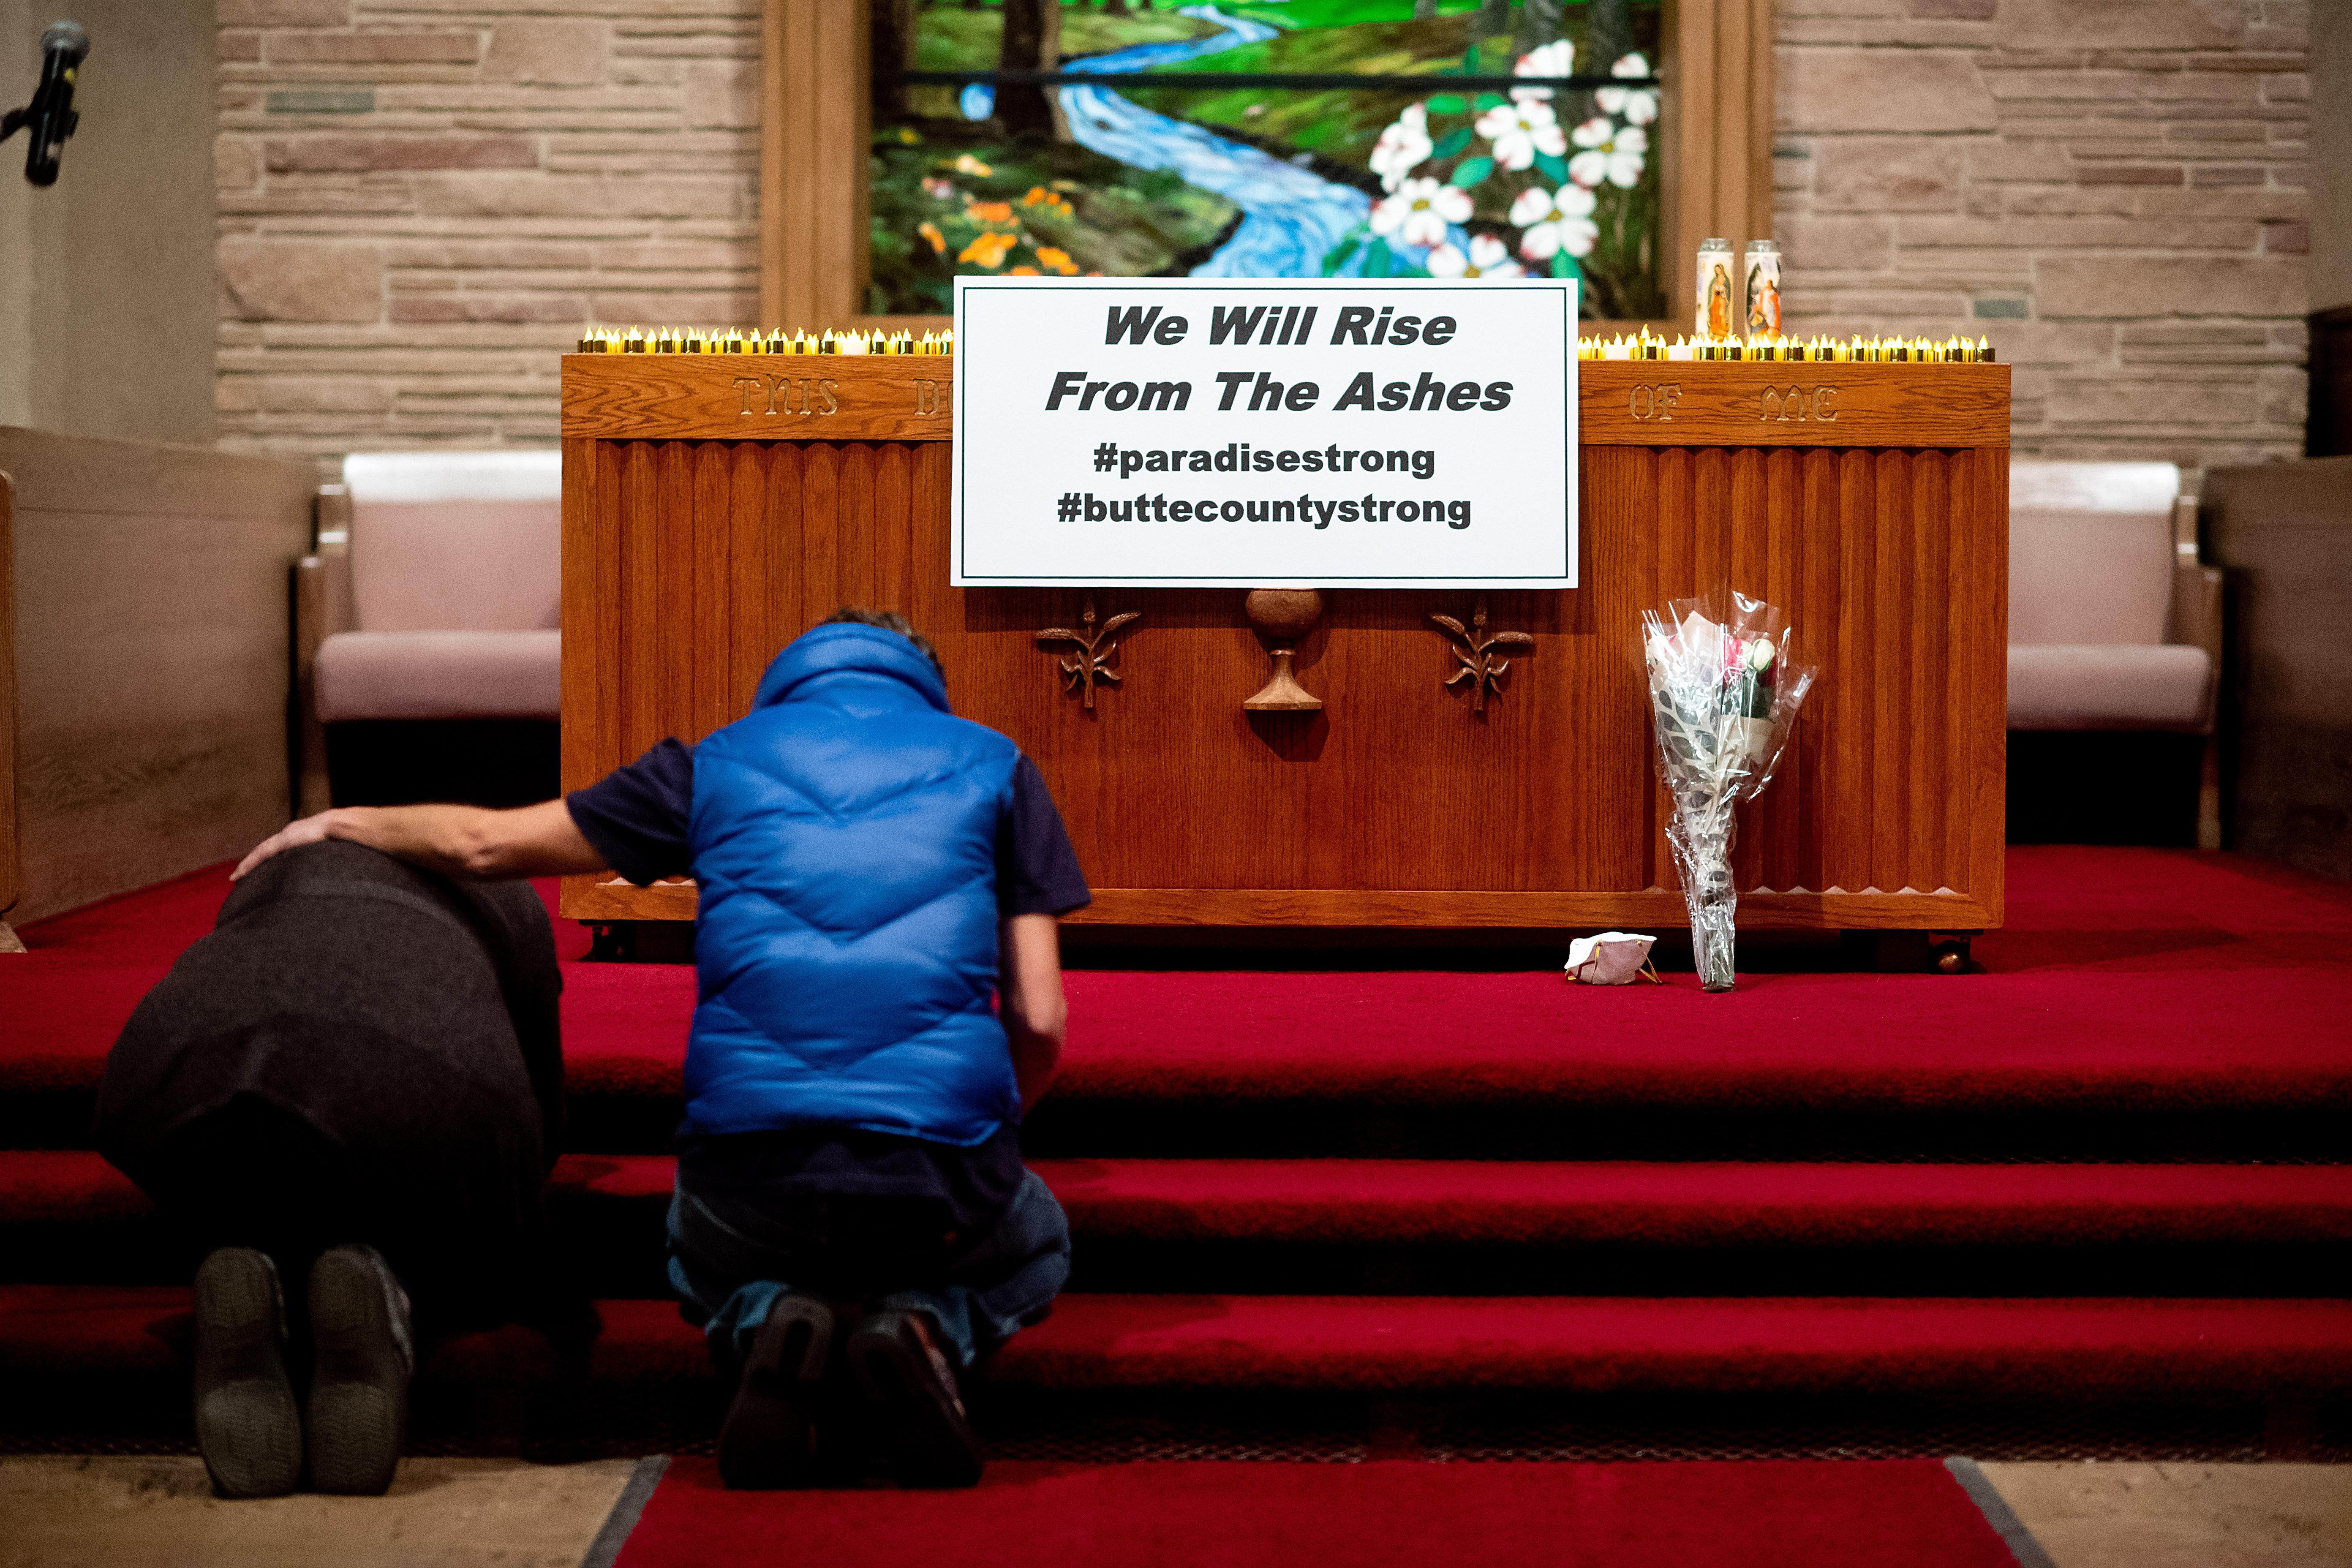 CHICO, CA - NOVEMBER 18: Mourners pray during a vigil for Camp Fire victims at the First Christian Church of Chico on November 18, 2018 in Chico, California. The blaze has killed at least 76 people and destroyed more than 10,000 structures according to Cal Fire. (Photo by Noah Berger-Pool/Getty Images)